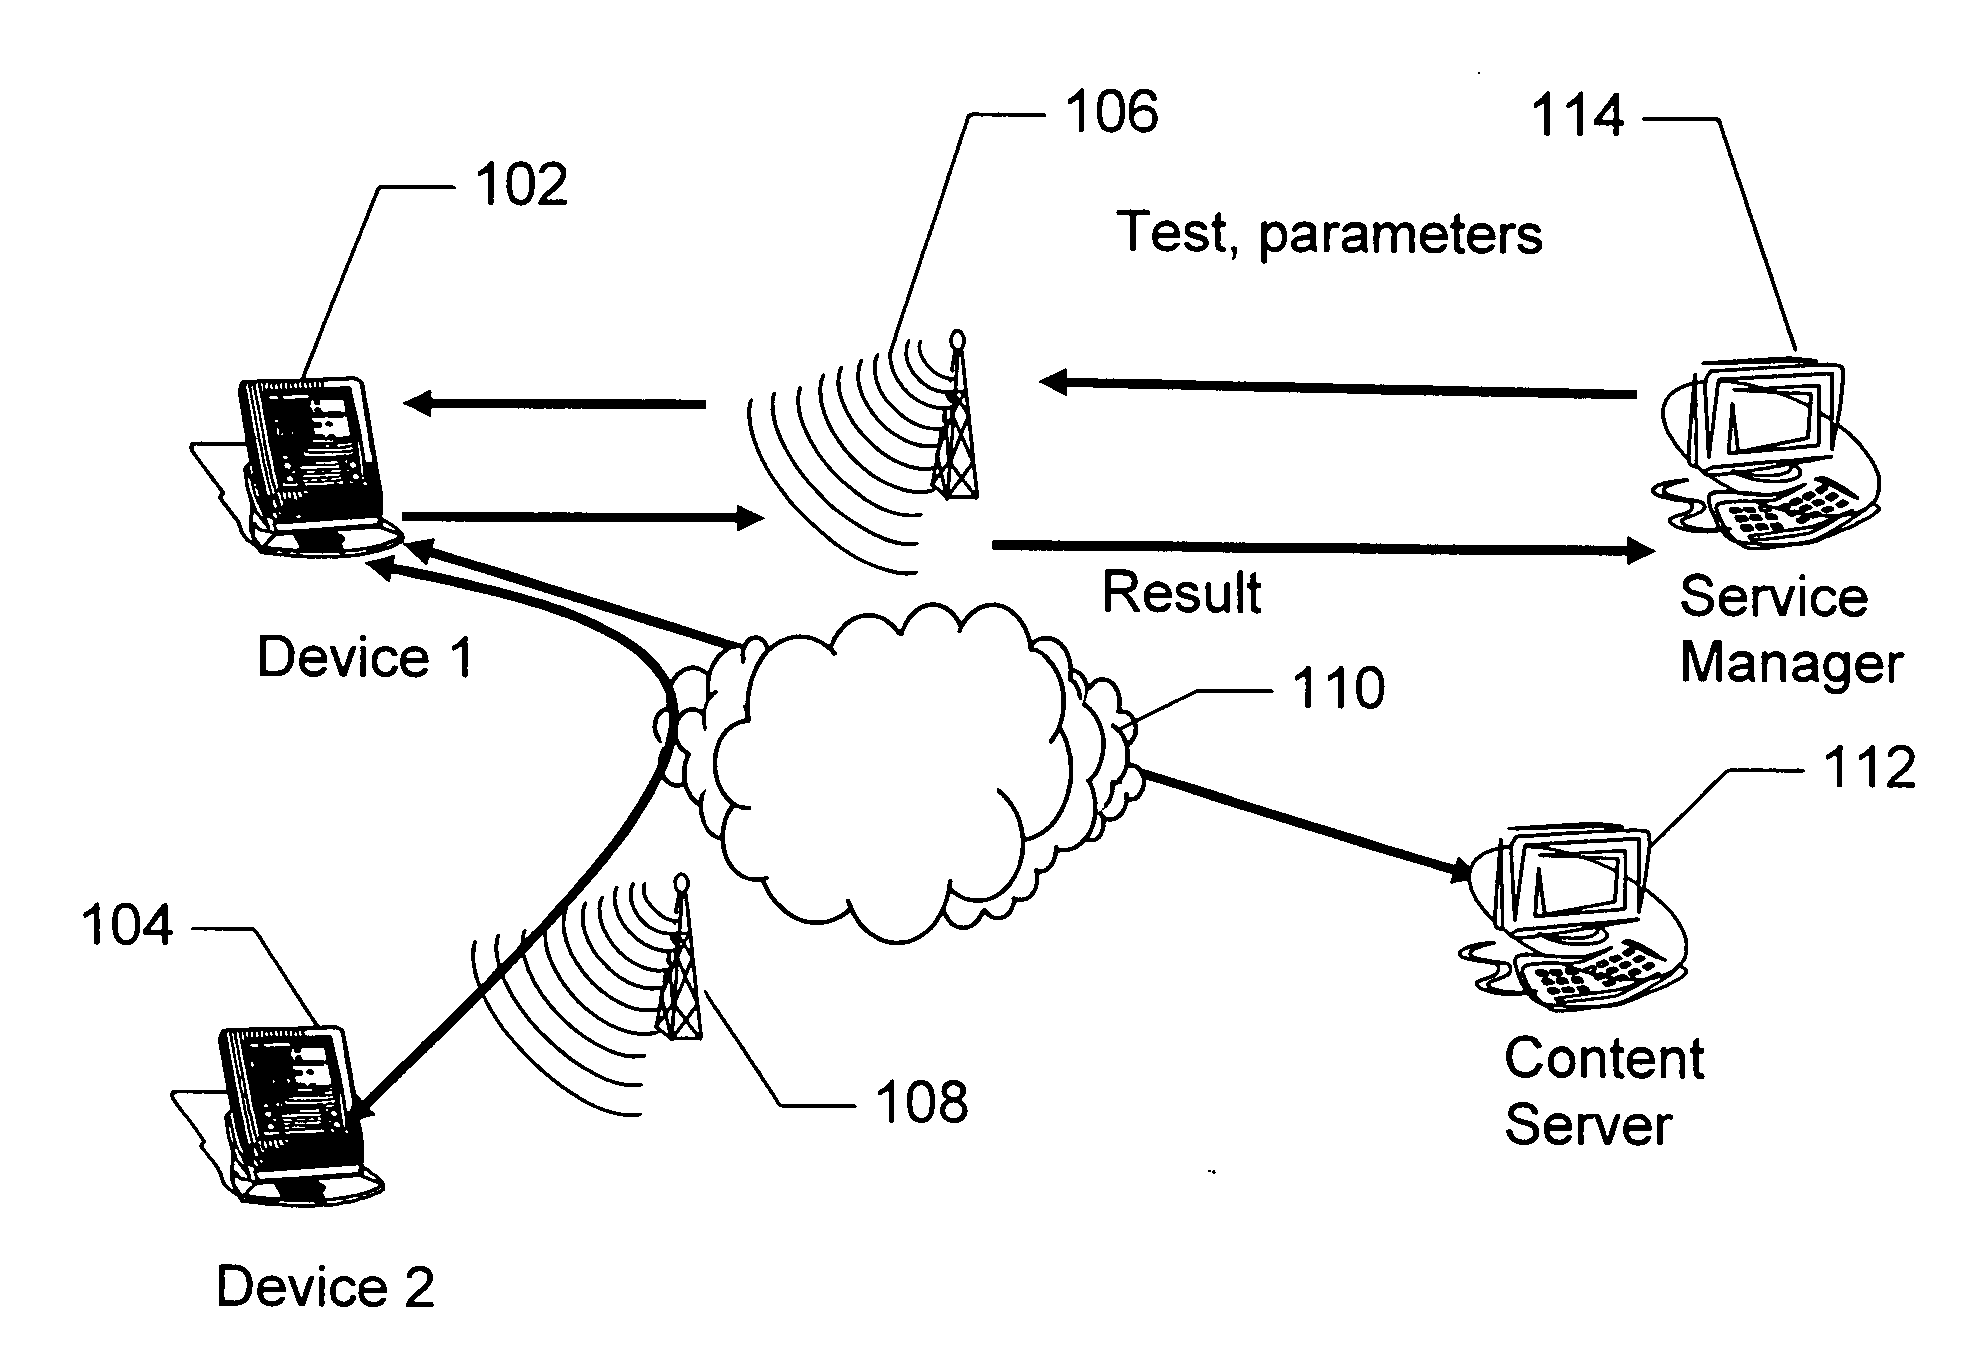 System and method for monitoring and measuring end-to-end performance using wireless devices